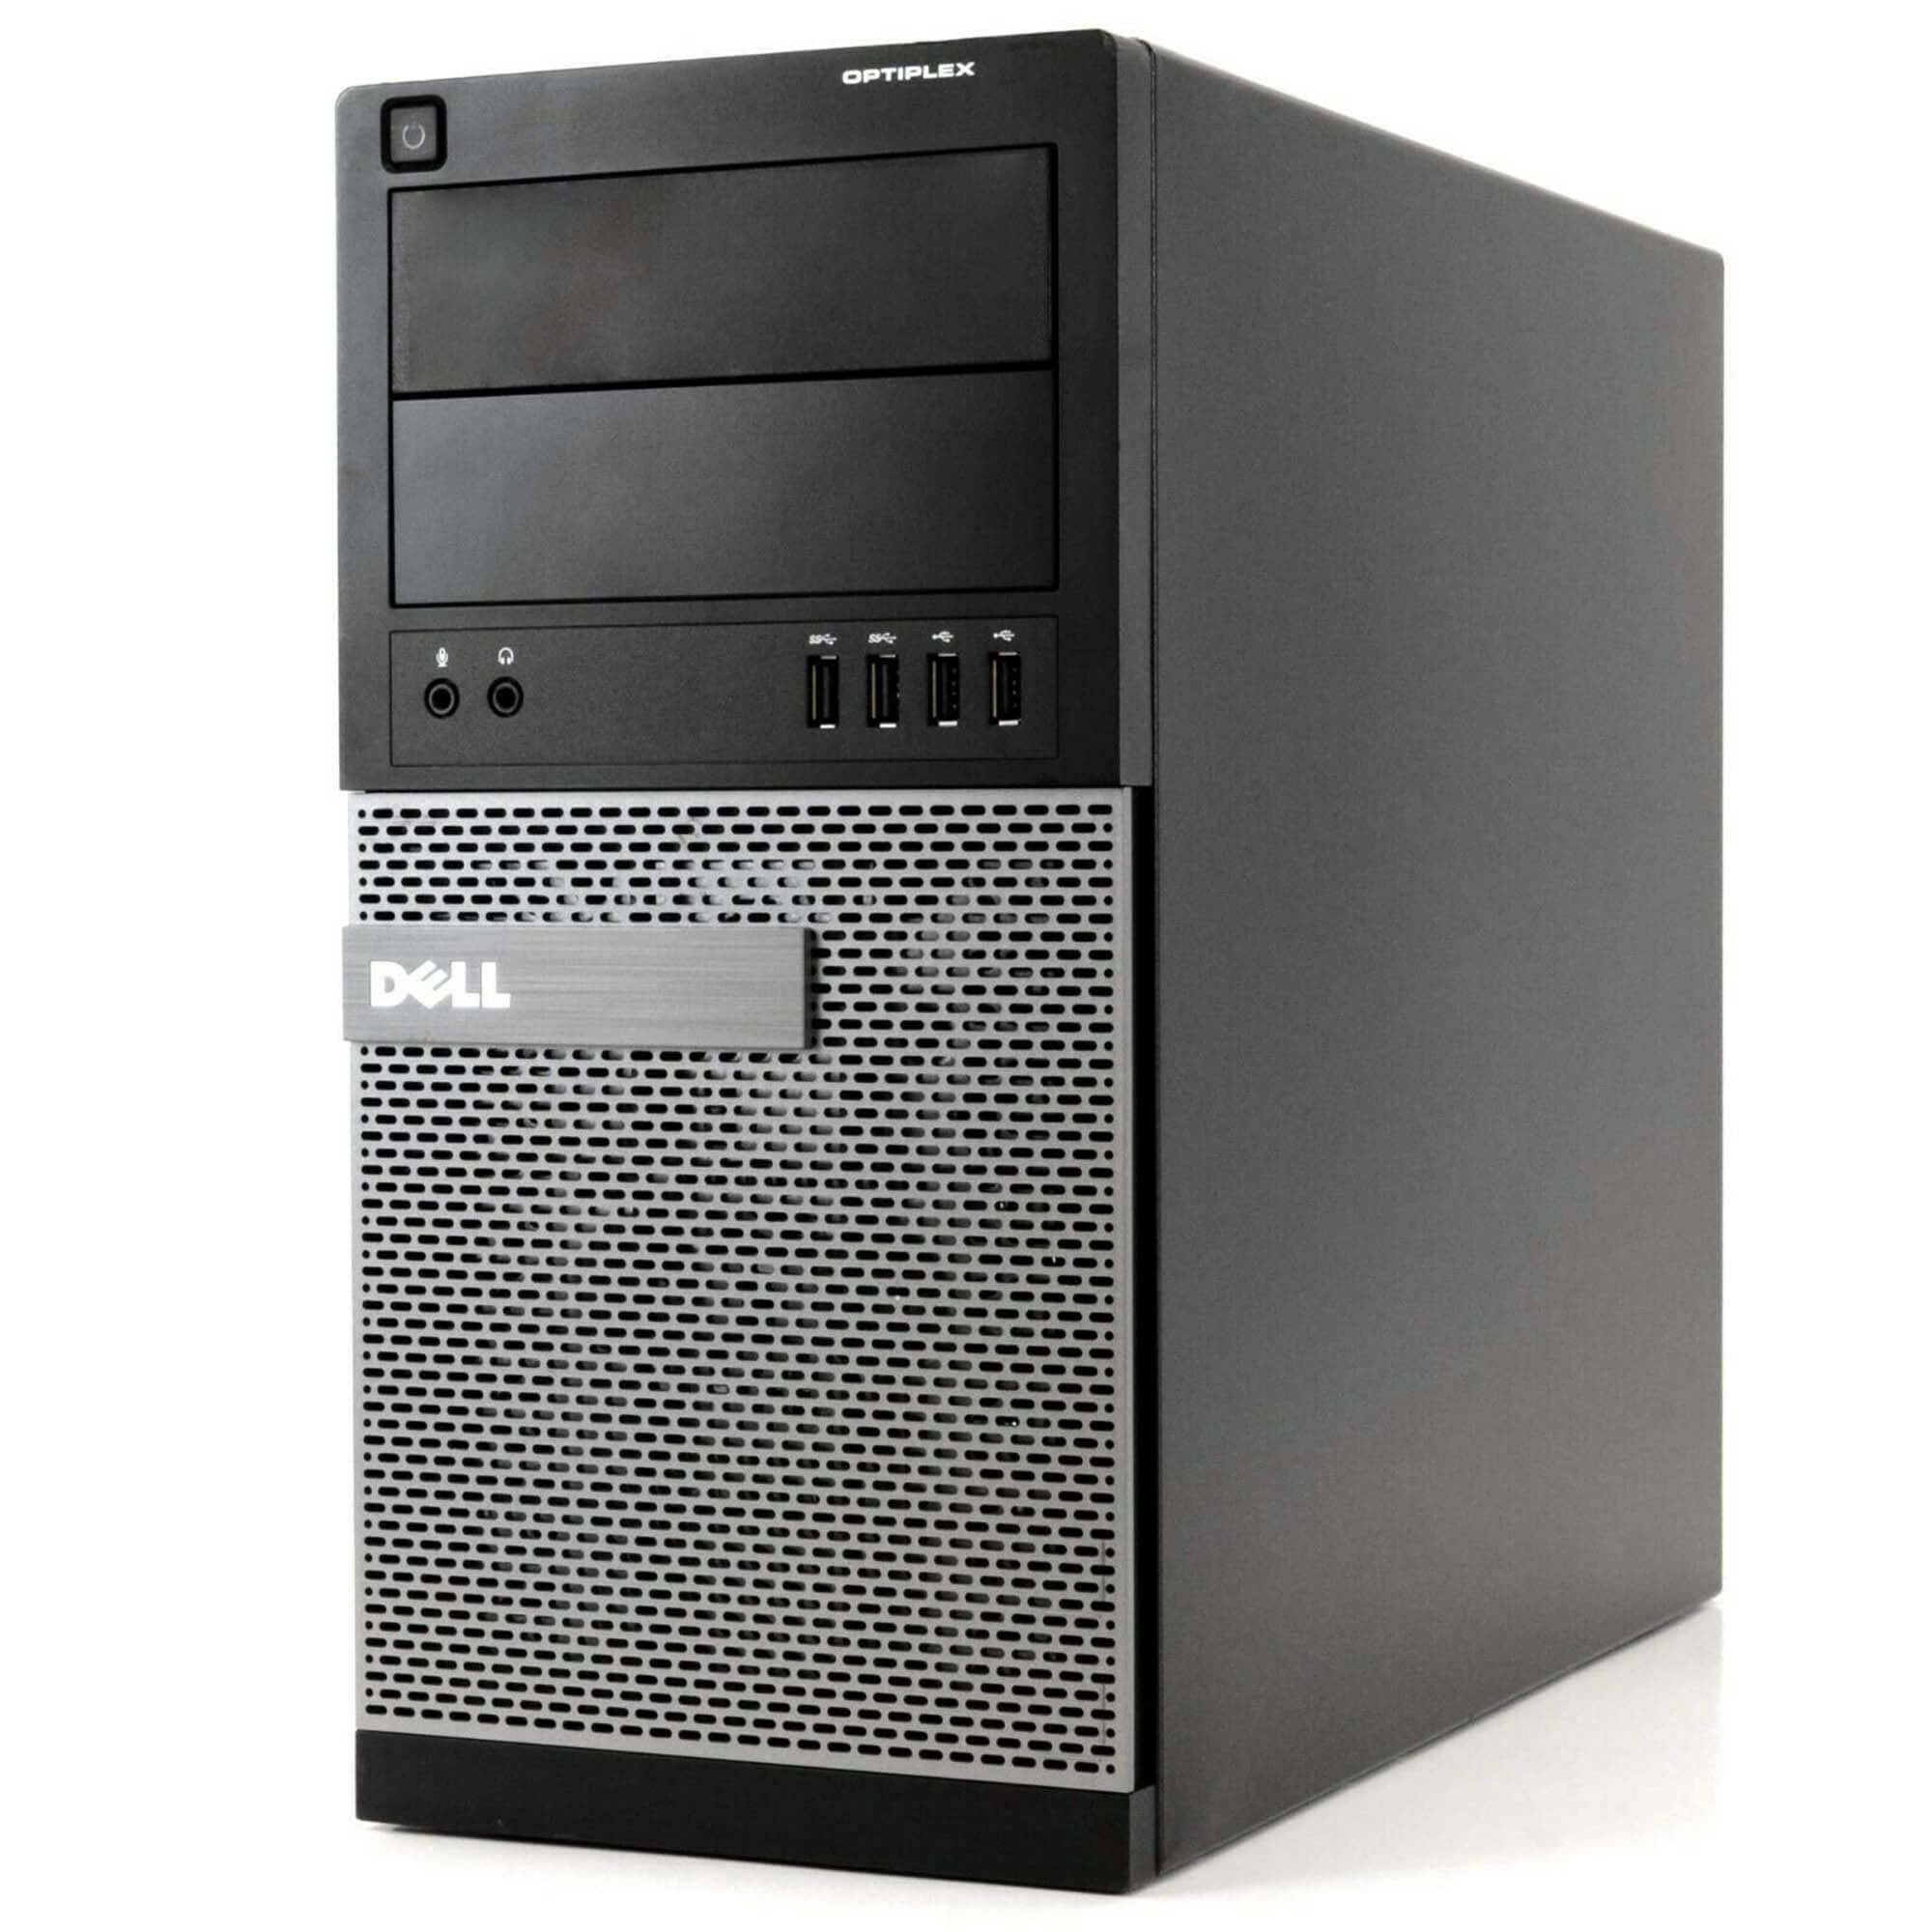 Dell Optiplex 9020 Tower Computer Intel Core i7 4770 8GB 1TB HDD DVD  Windows 10 Home New Keyboard, Mouse,Power cord,WiFi Adapter Refurbished